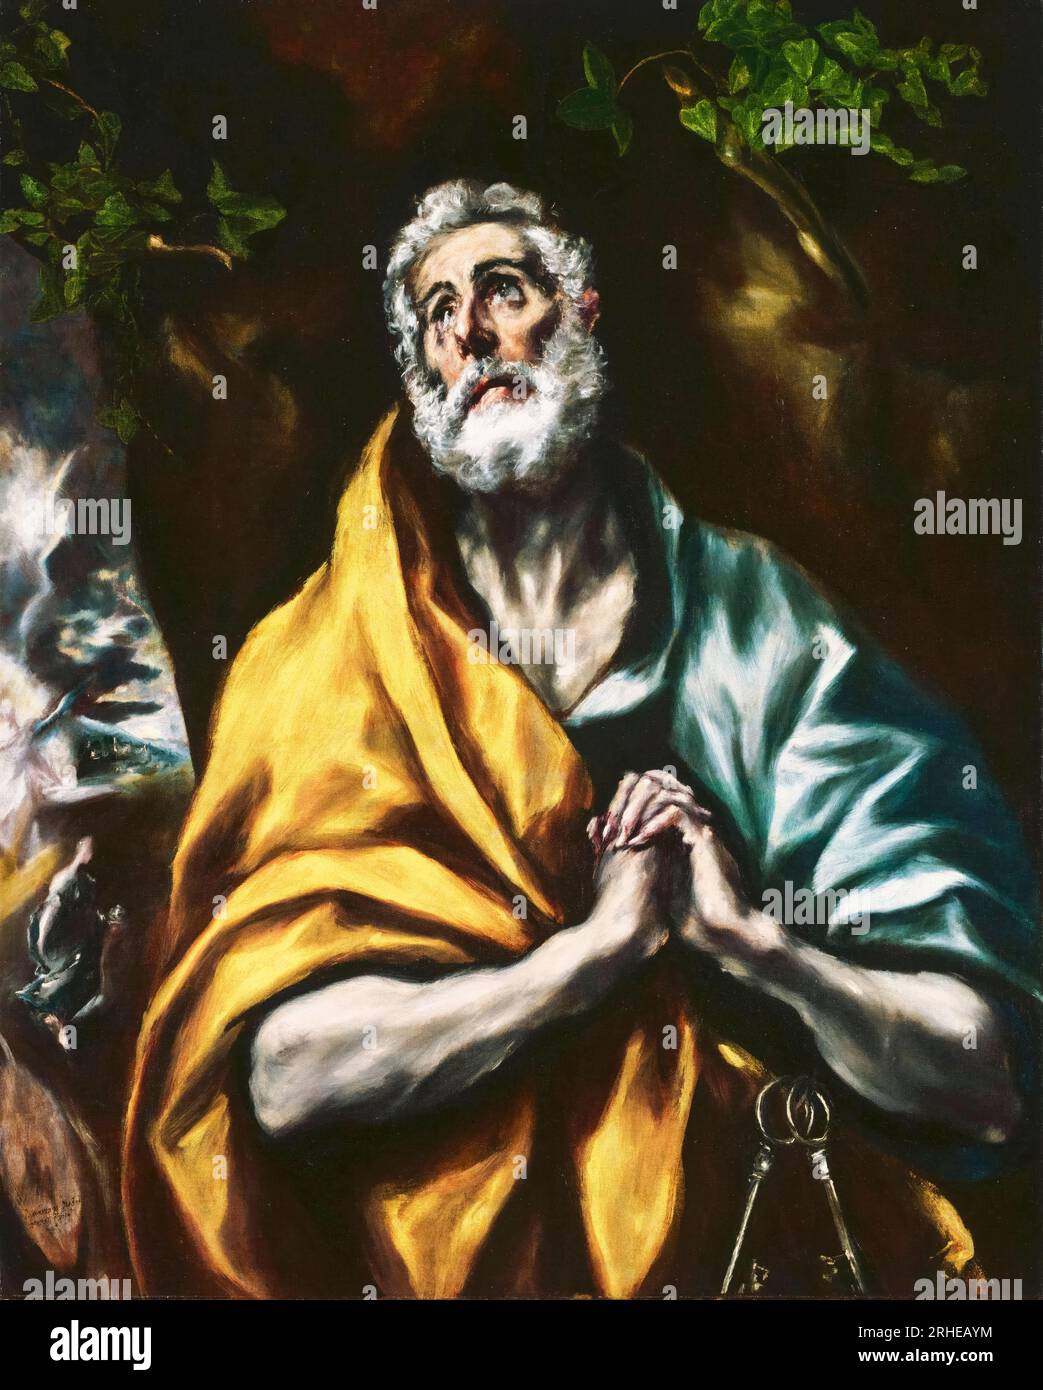 The Repentant St Peter, painting in oil on canvas by El Greco, after 1600 Stock Photo